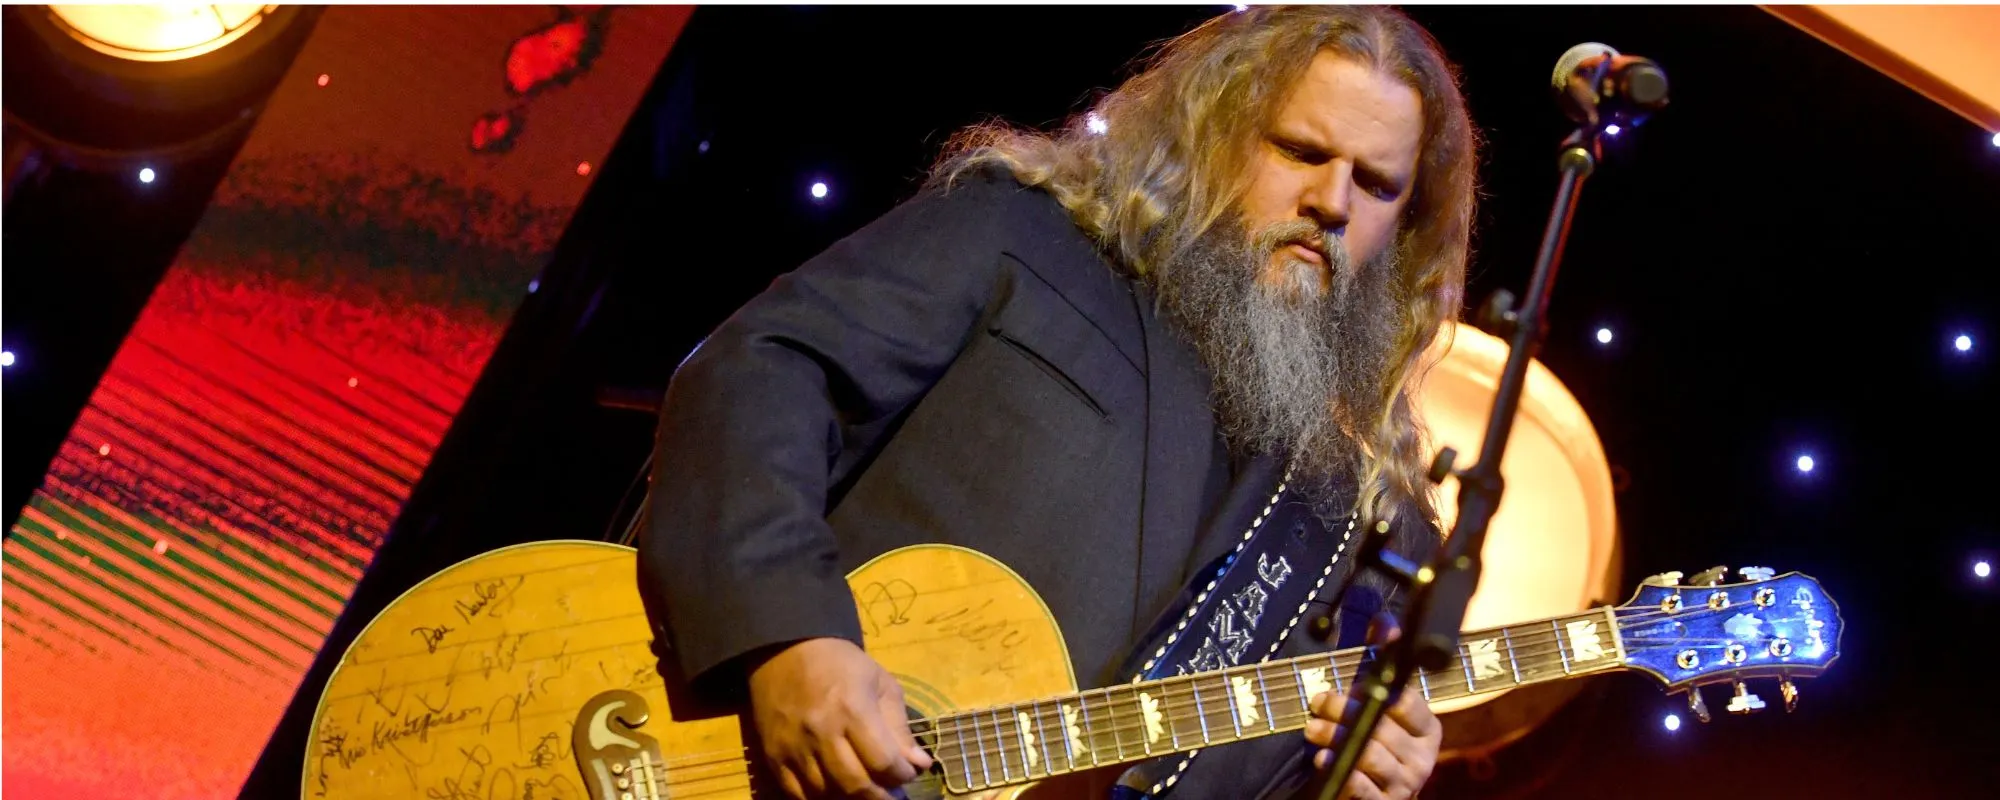 5 Songs You Didn’t Know Jamey Johnson Wrote